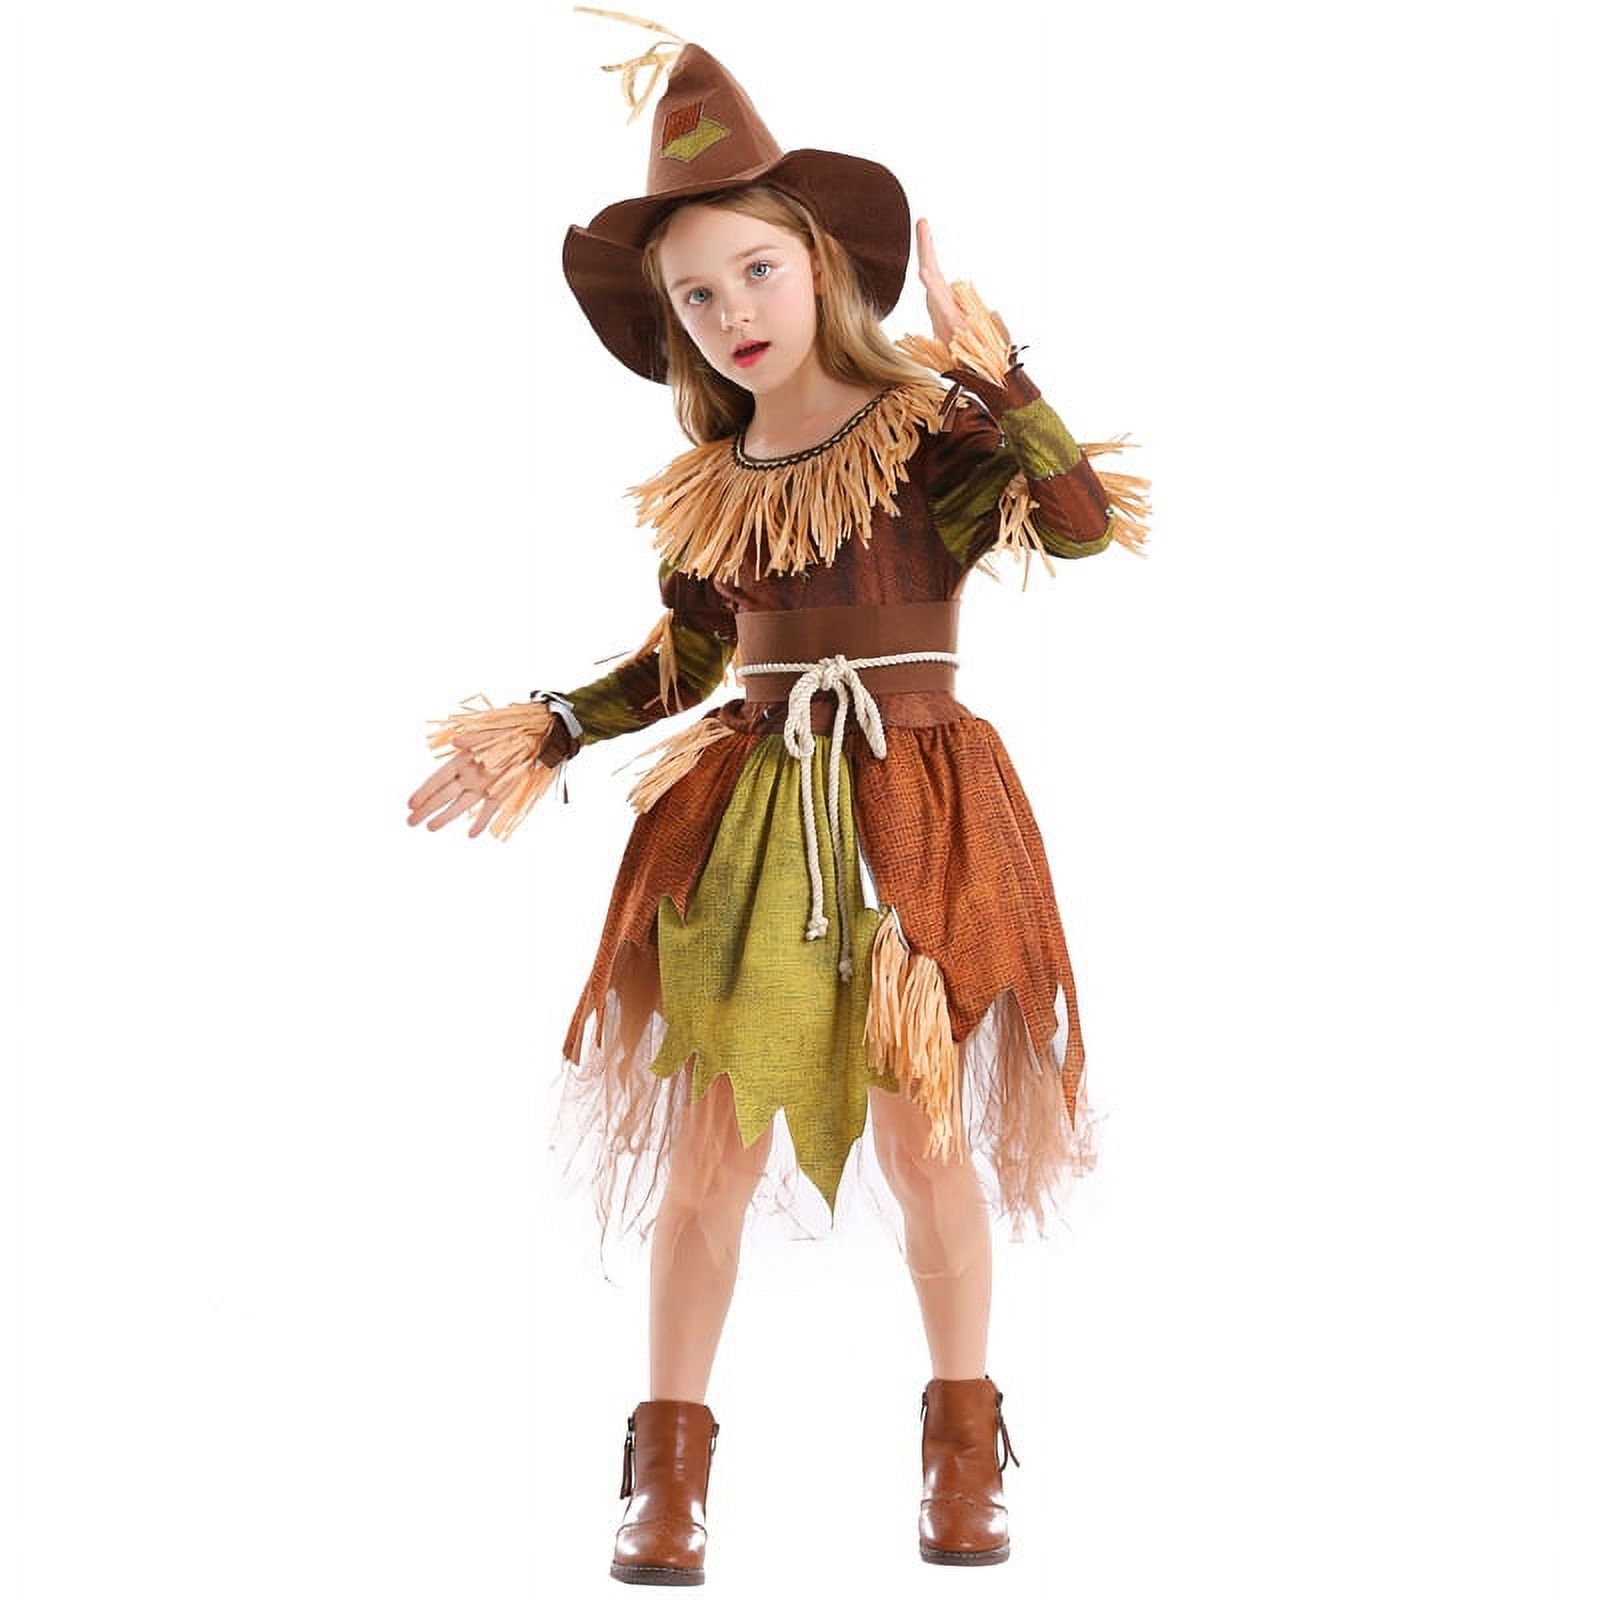 Children Girls Scary Farm Scarecrow Costume Party Dress up, 4-10Y - image 4 of 6